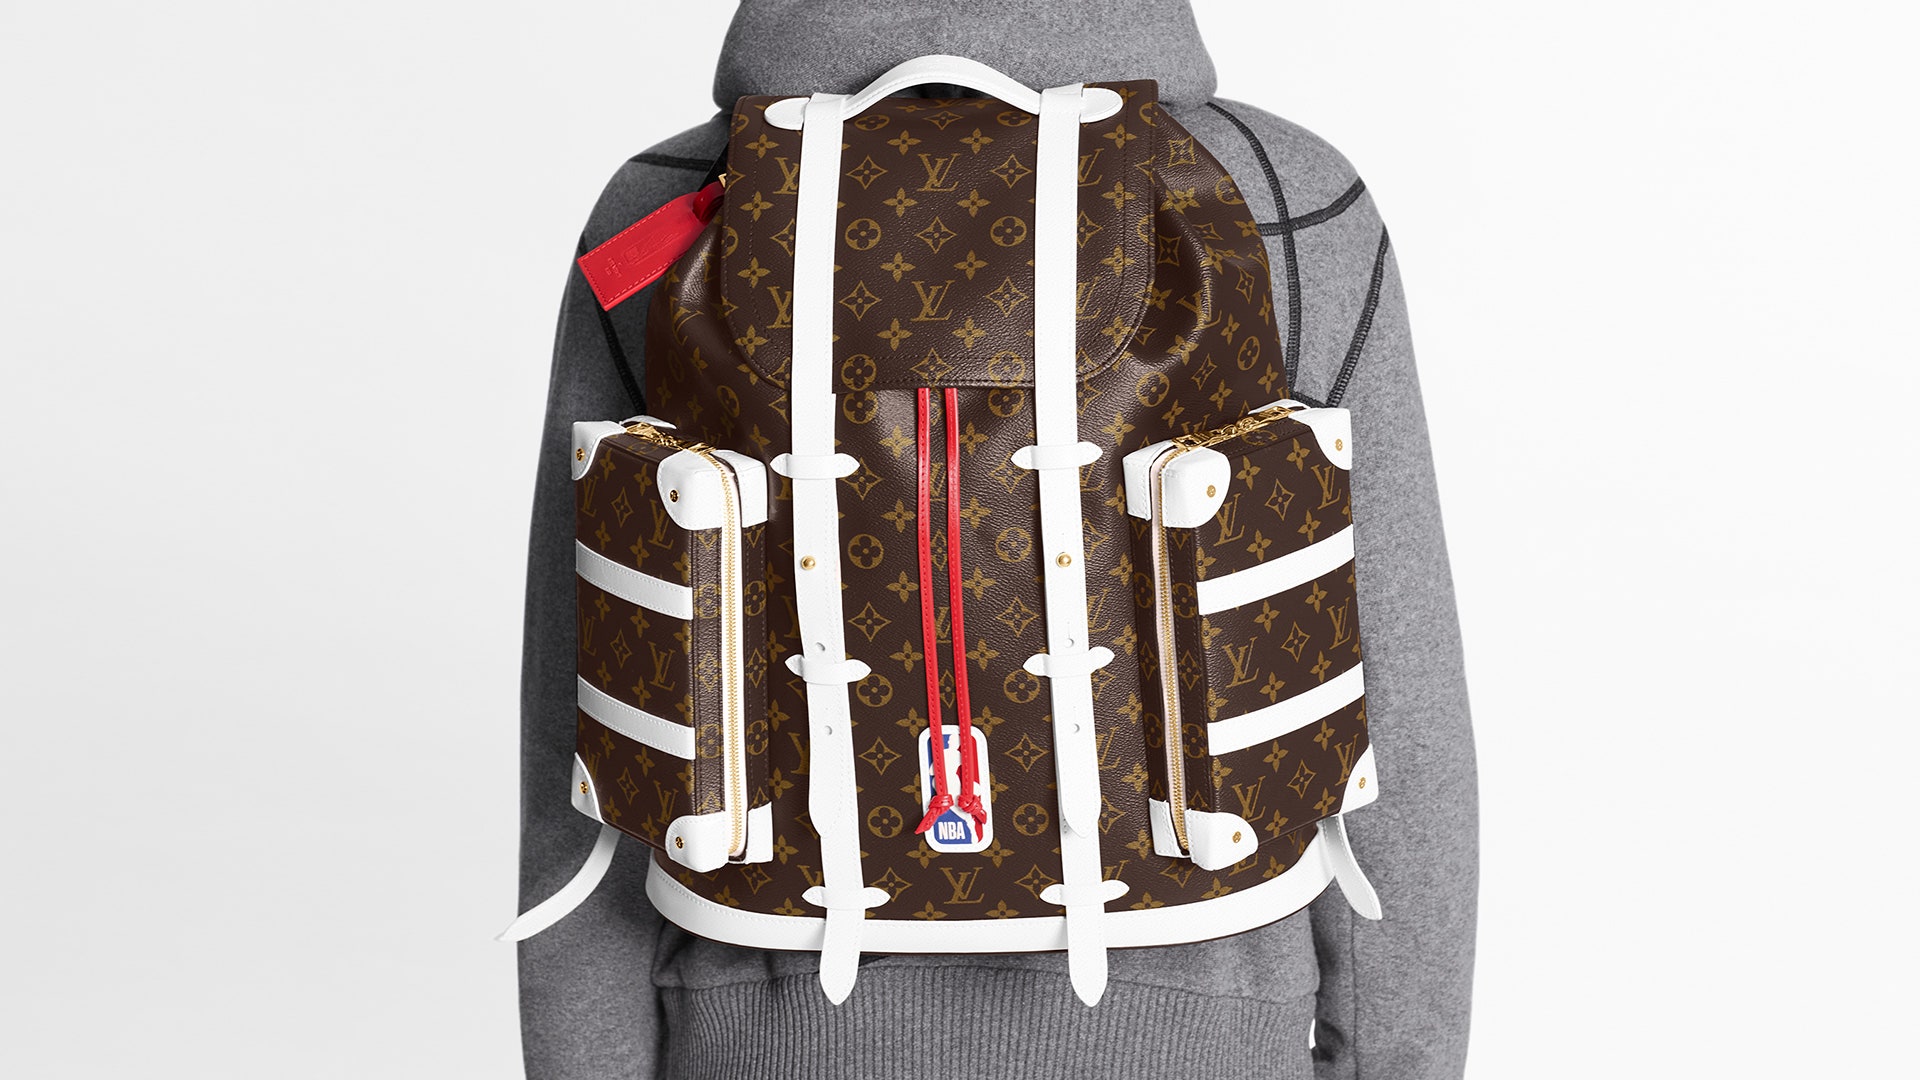 Channel LeBron James with the Louis Vuitton x NBA collection - www.semadata.org